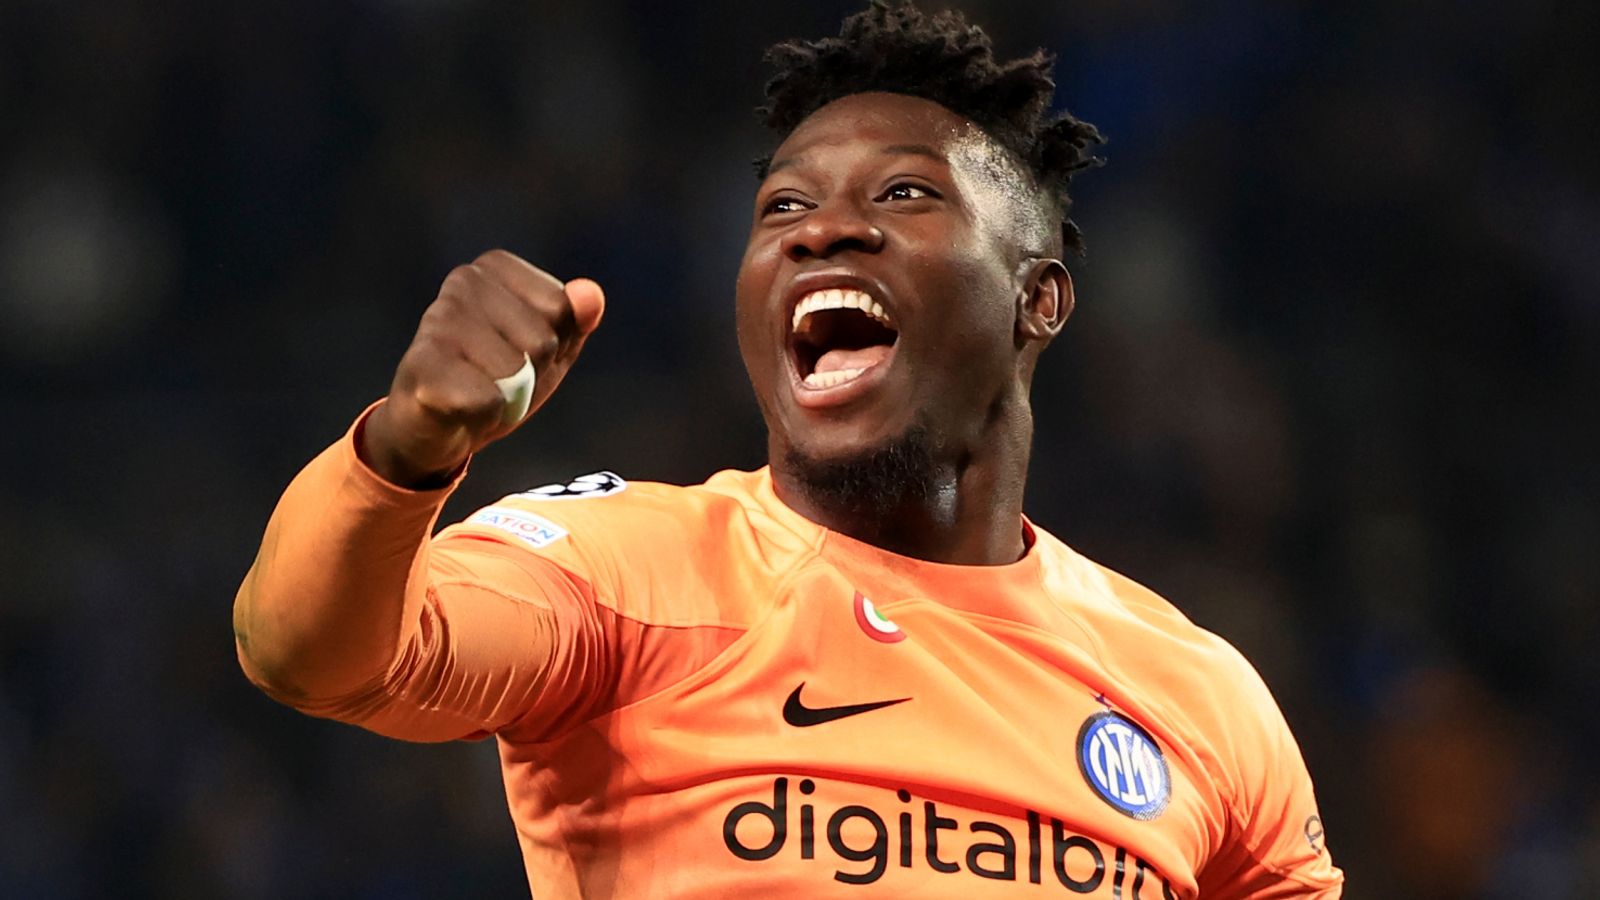 Andre Onana completes Manchester United medical ahead of £47.2m transfer from Inter Milan | Football News